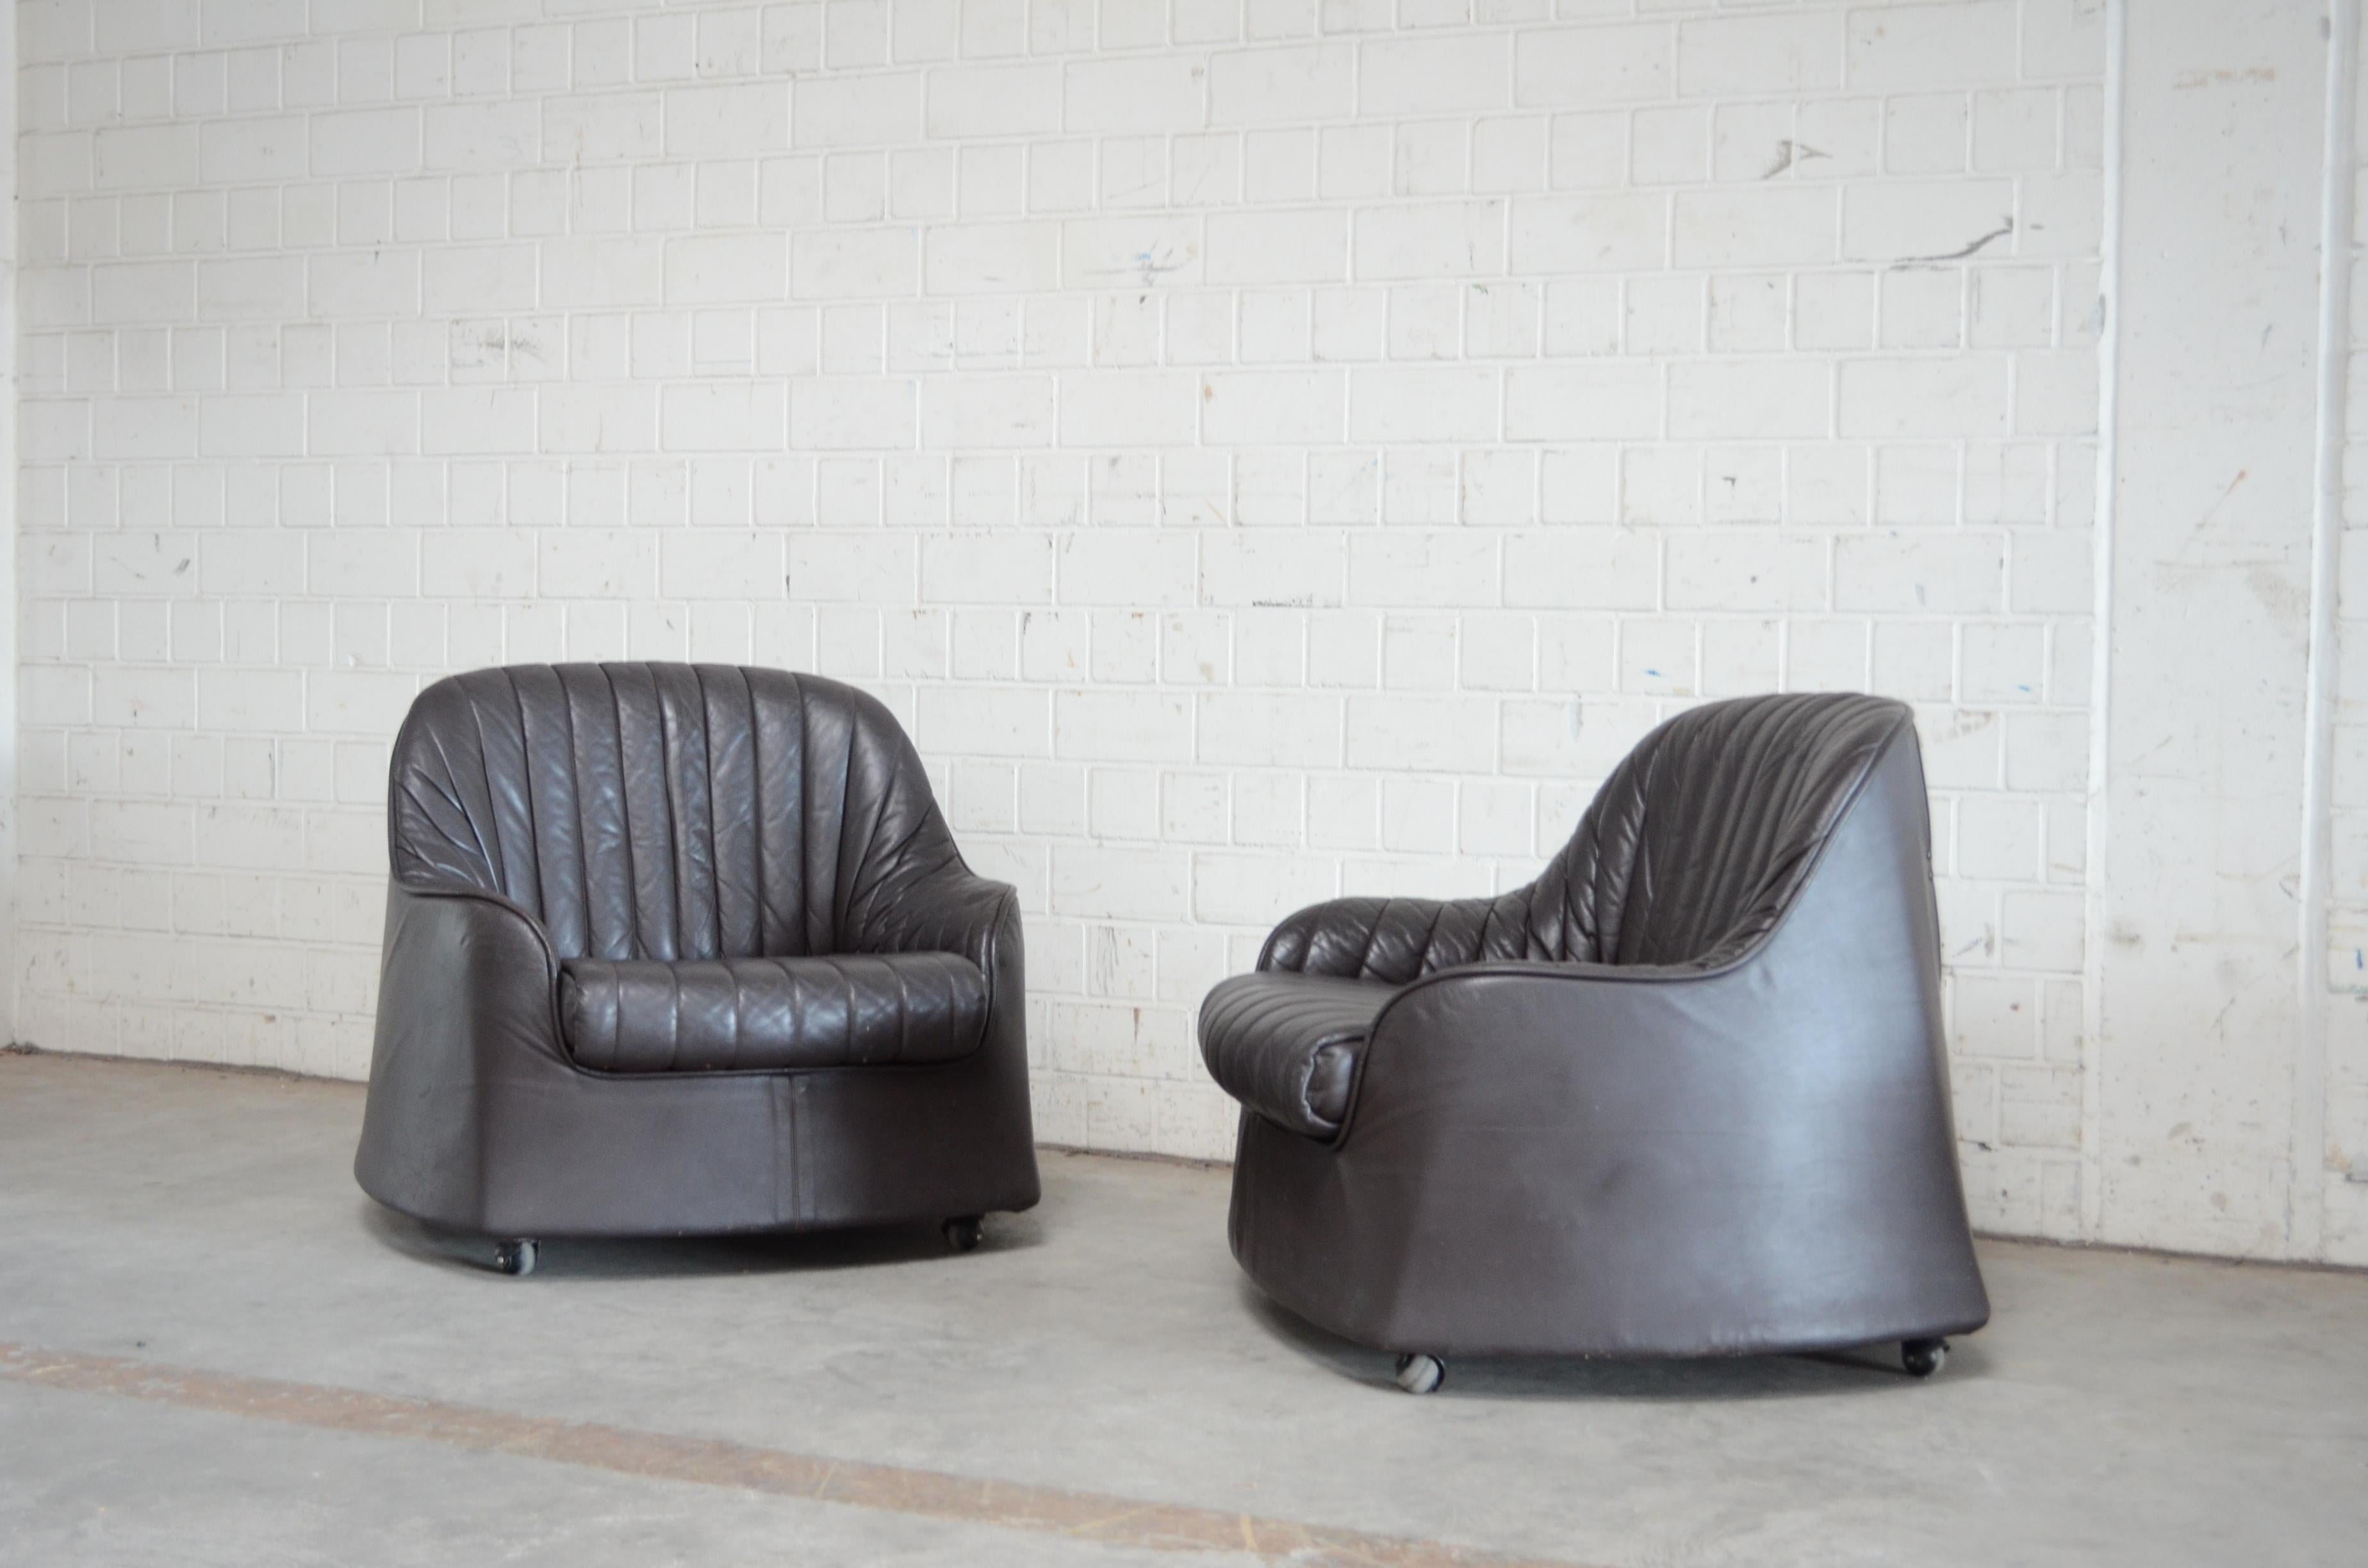 This pair of dark brown leather armchairs made of injection moulded polyurethane foam with a plywood base and rubber roller feet.
It was designed by Italian Architect and designer Tobia & Afra Scarpa 1968 for Cassina
The model Ciprea was one of